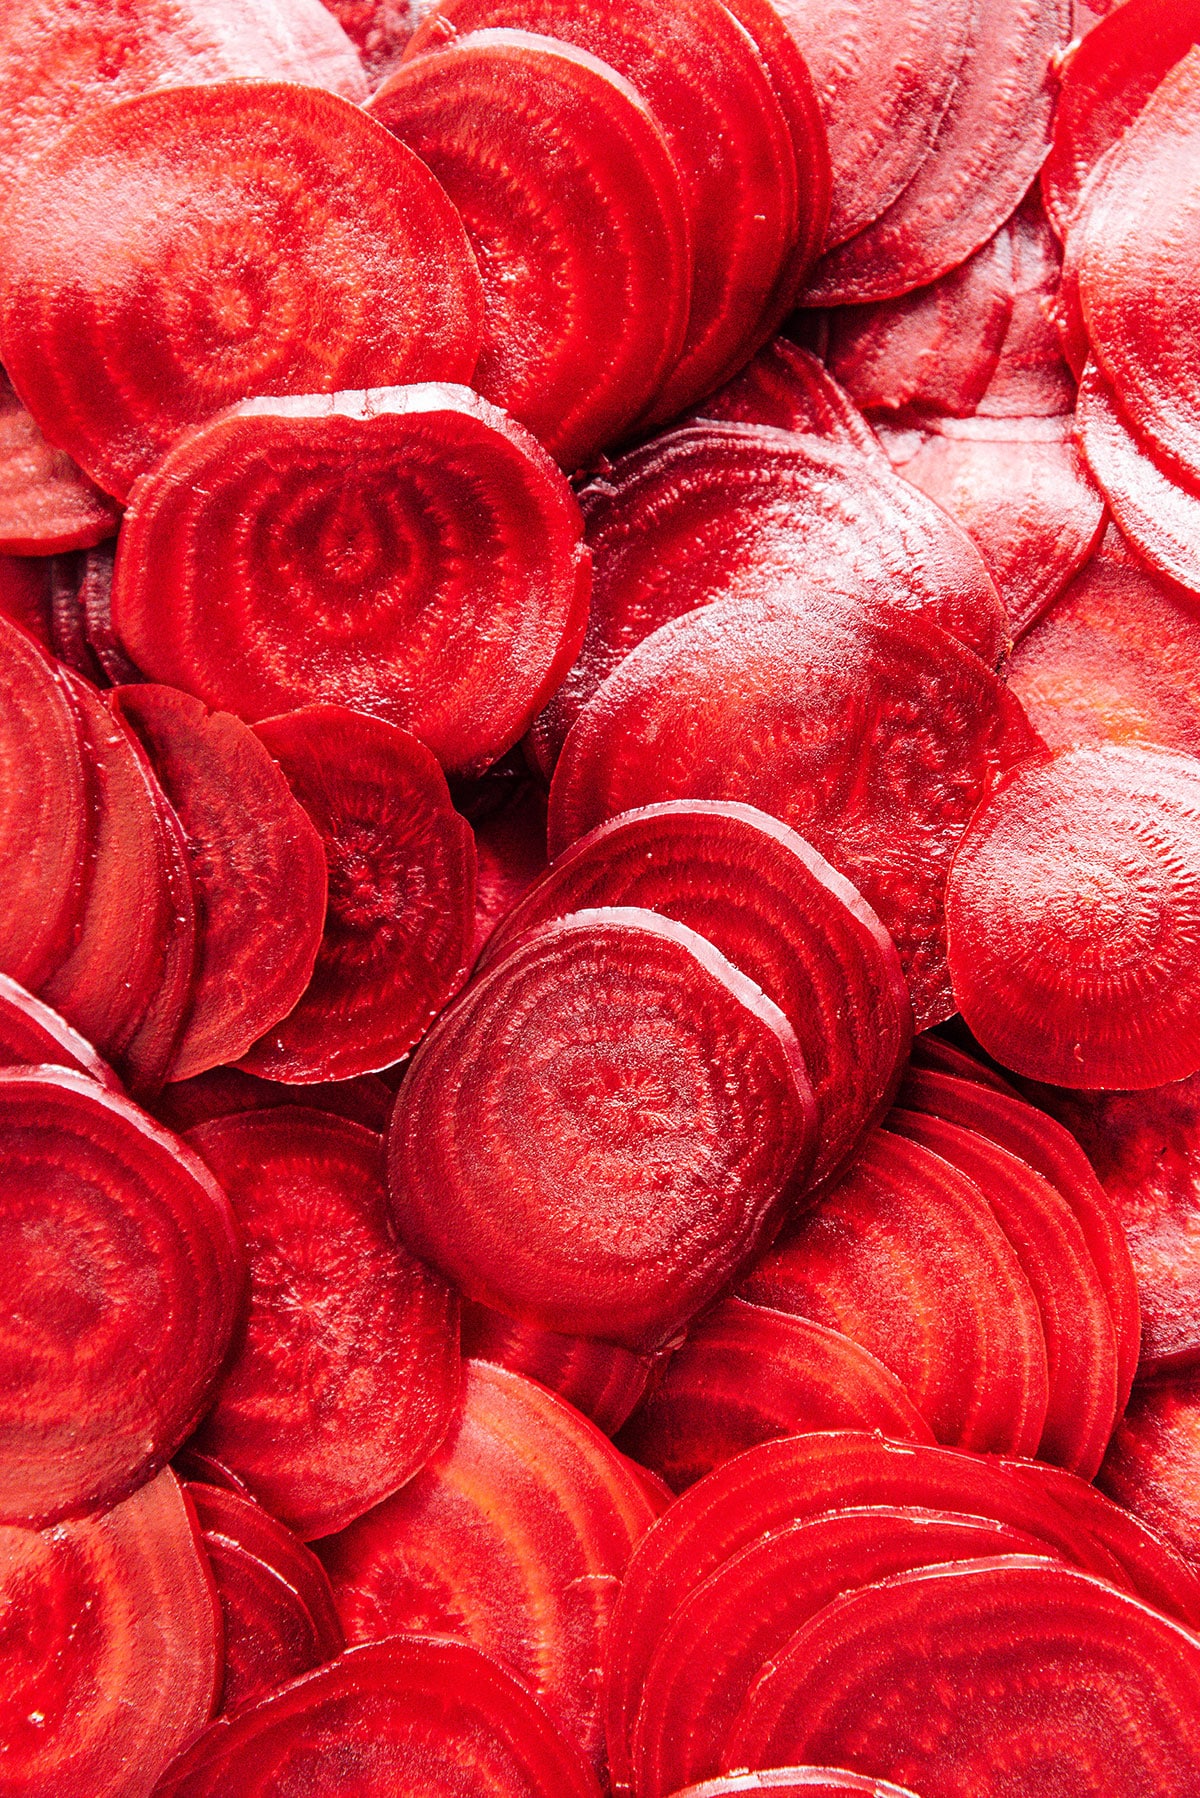 Sliced beets that are bright red.